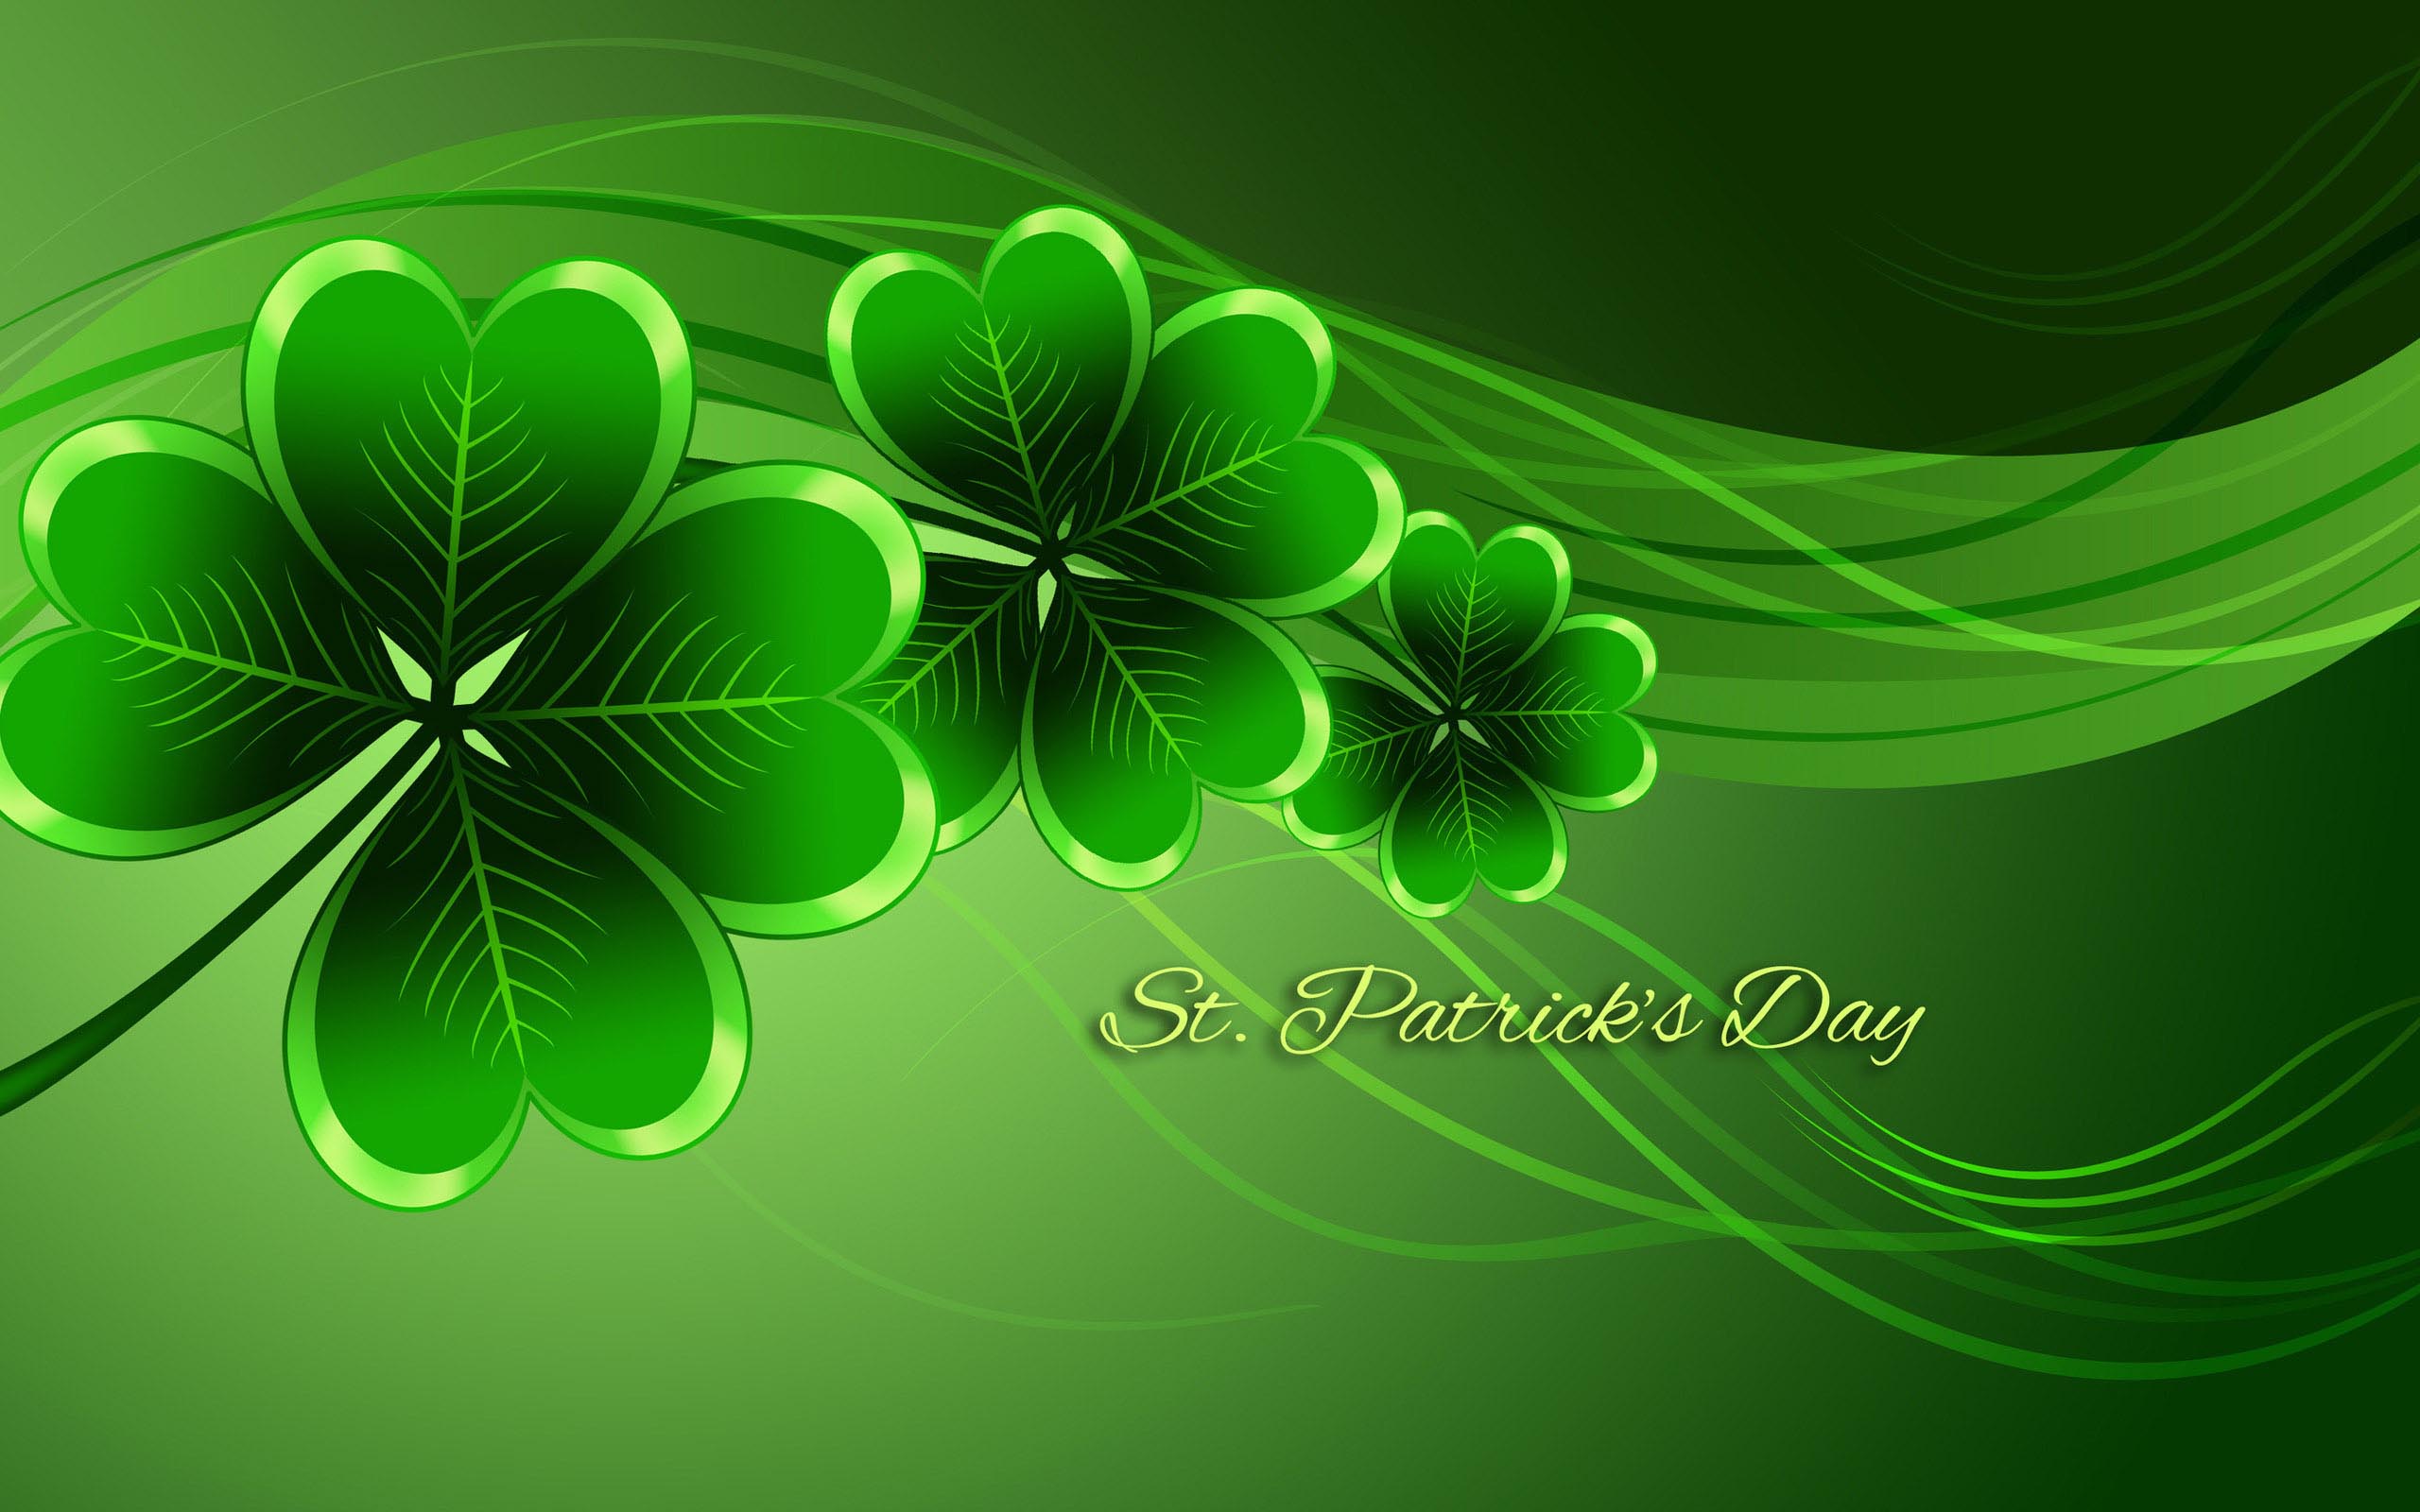 Holiday Wallpapers For Desktop - Background St Patricks Day - HD Wallpaper 